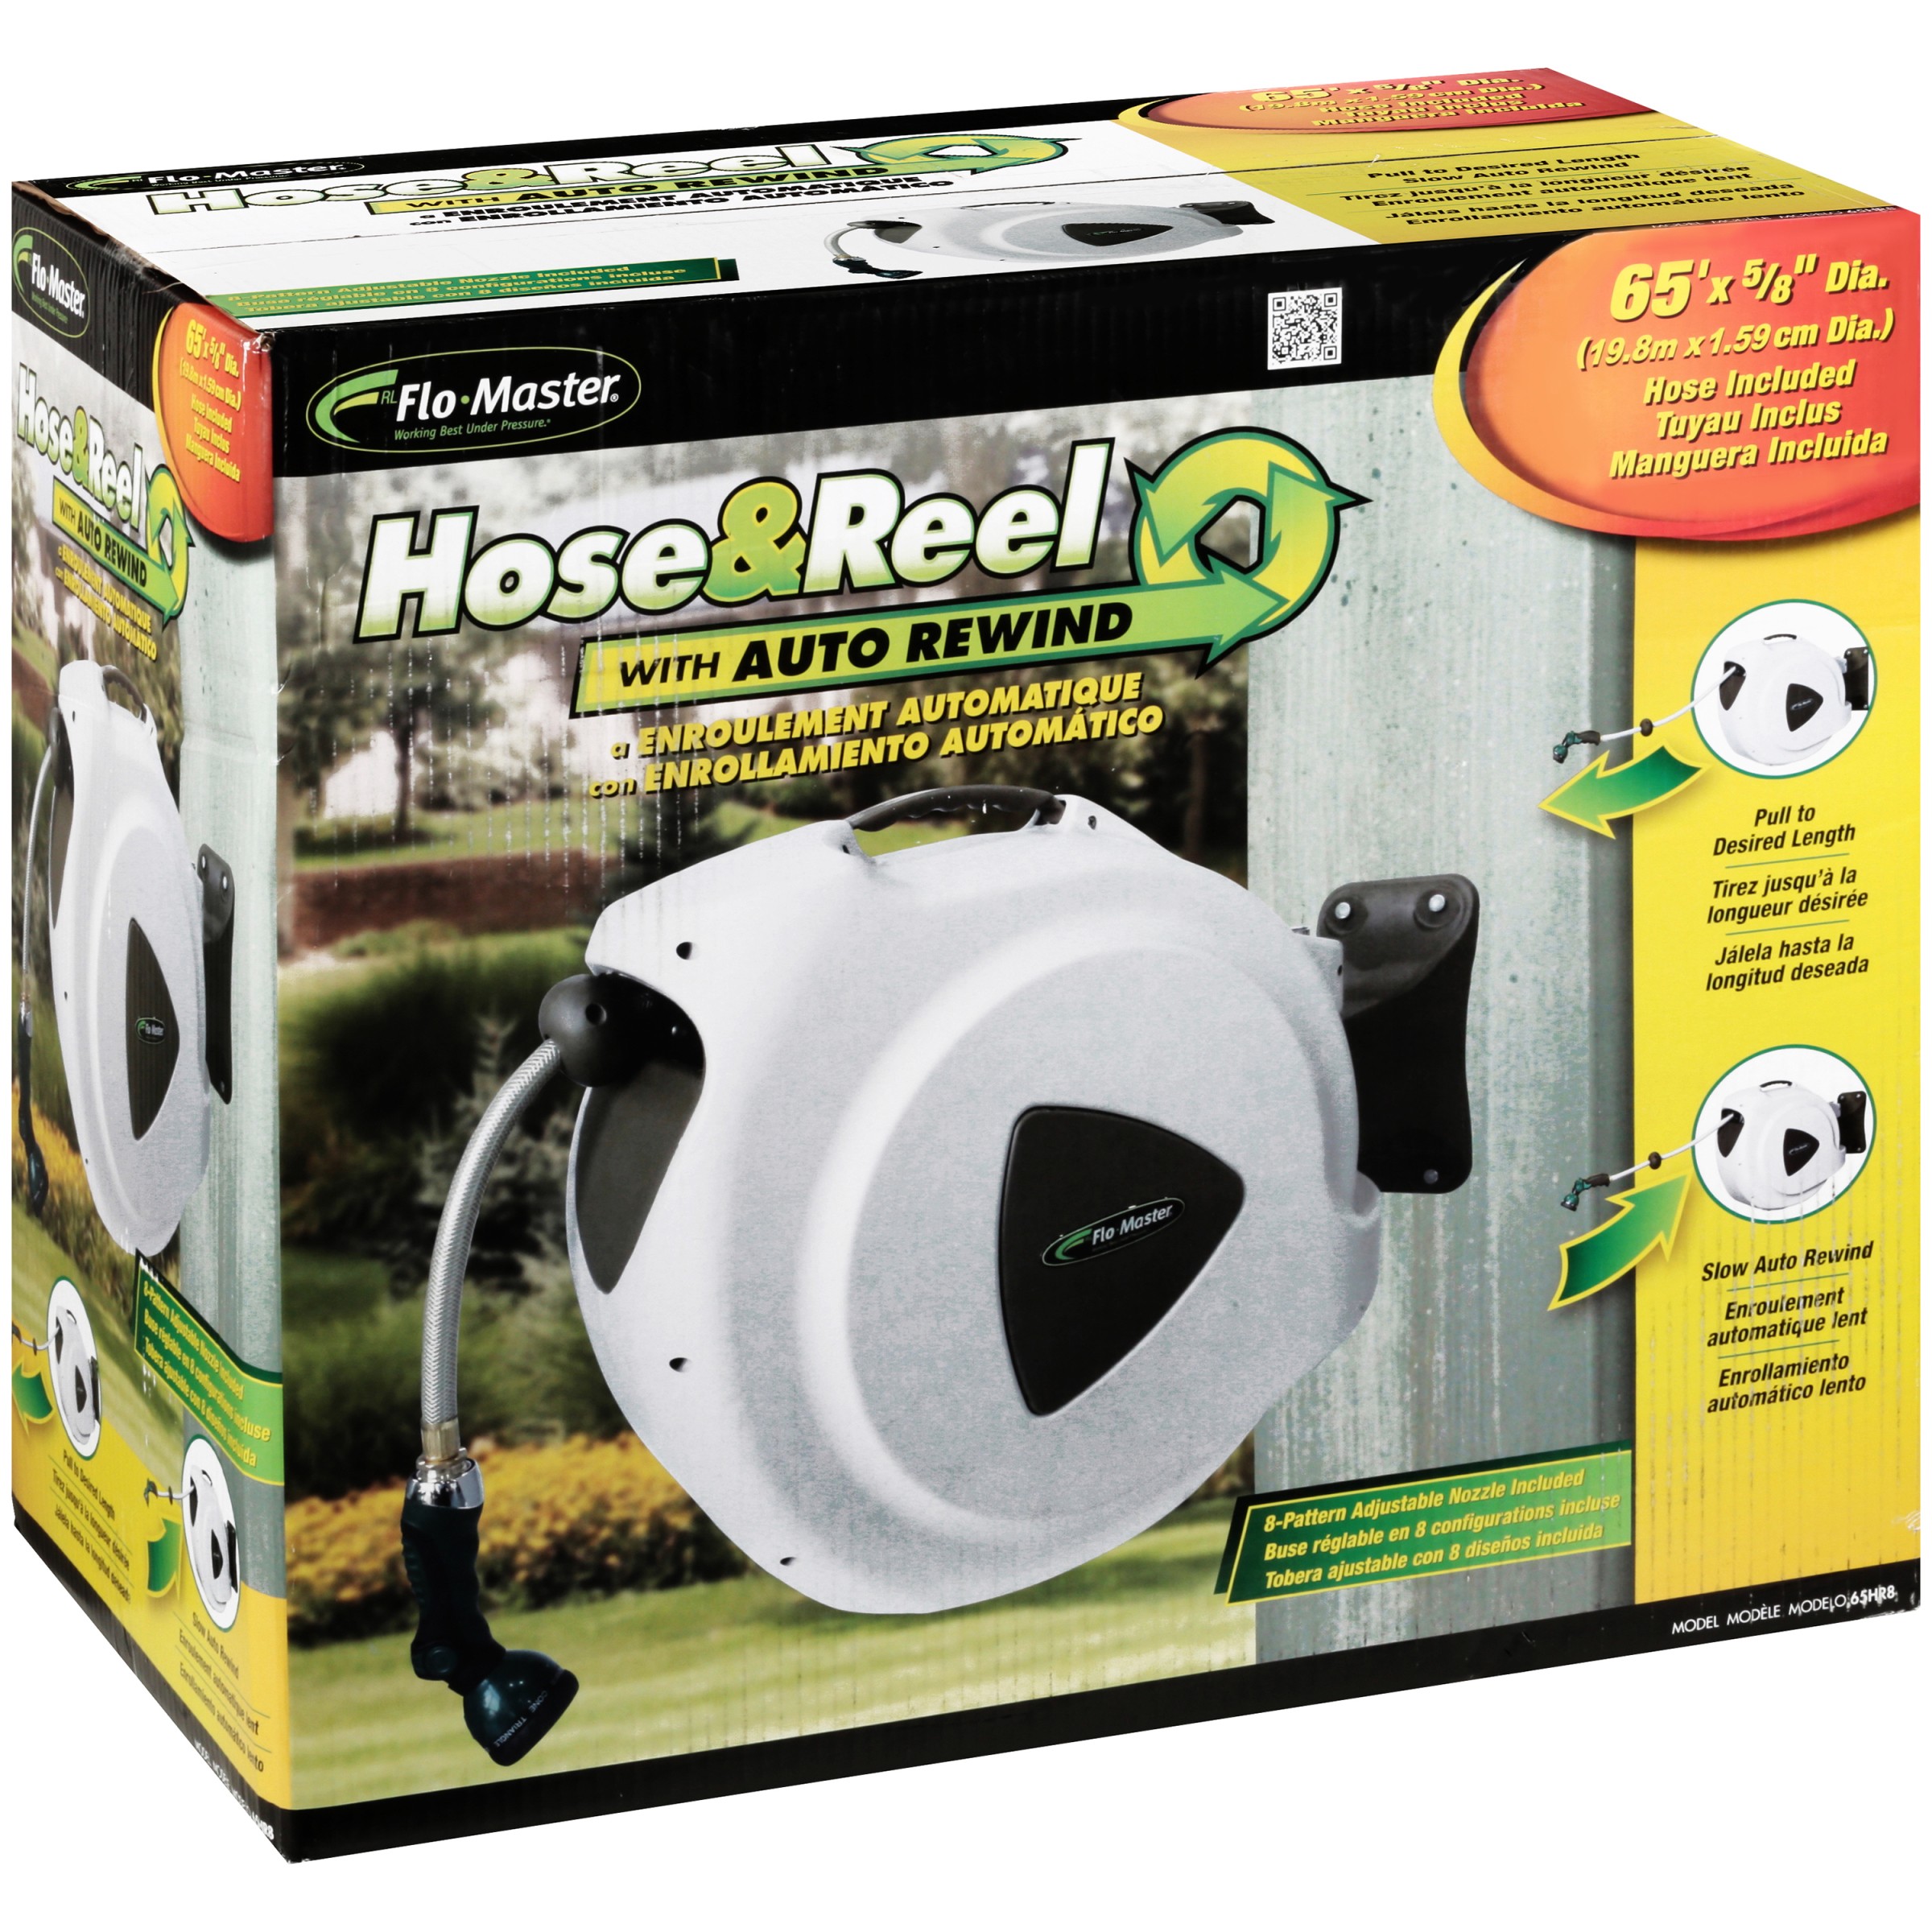 RL Flo-Master 65 Foot Hose & Reel with Auto Rewind - image 2 of 6